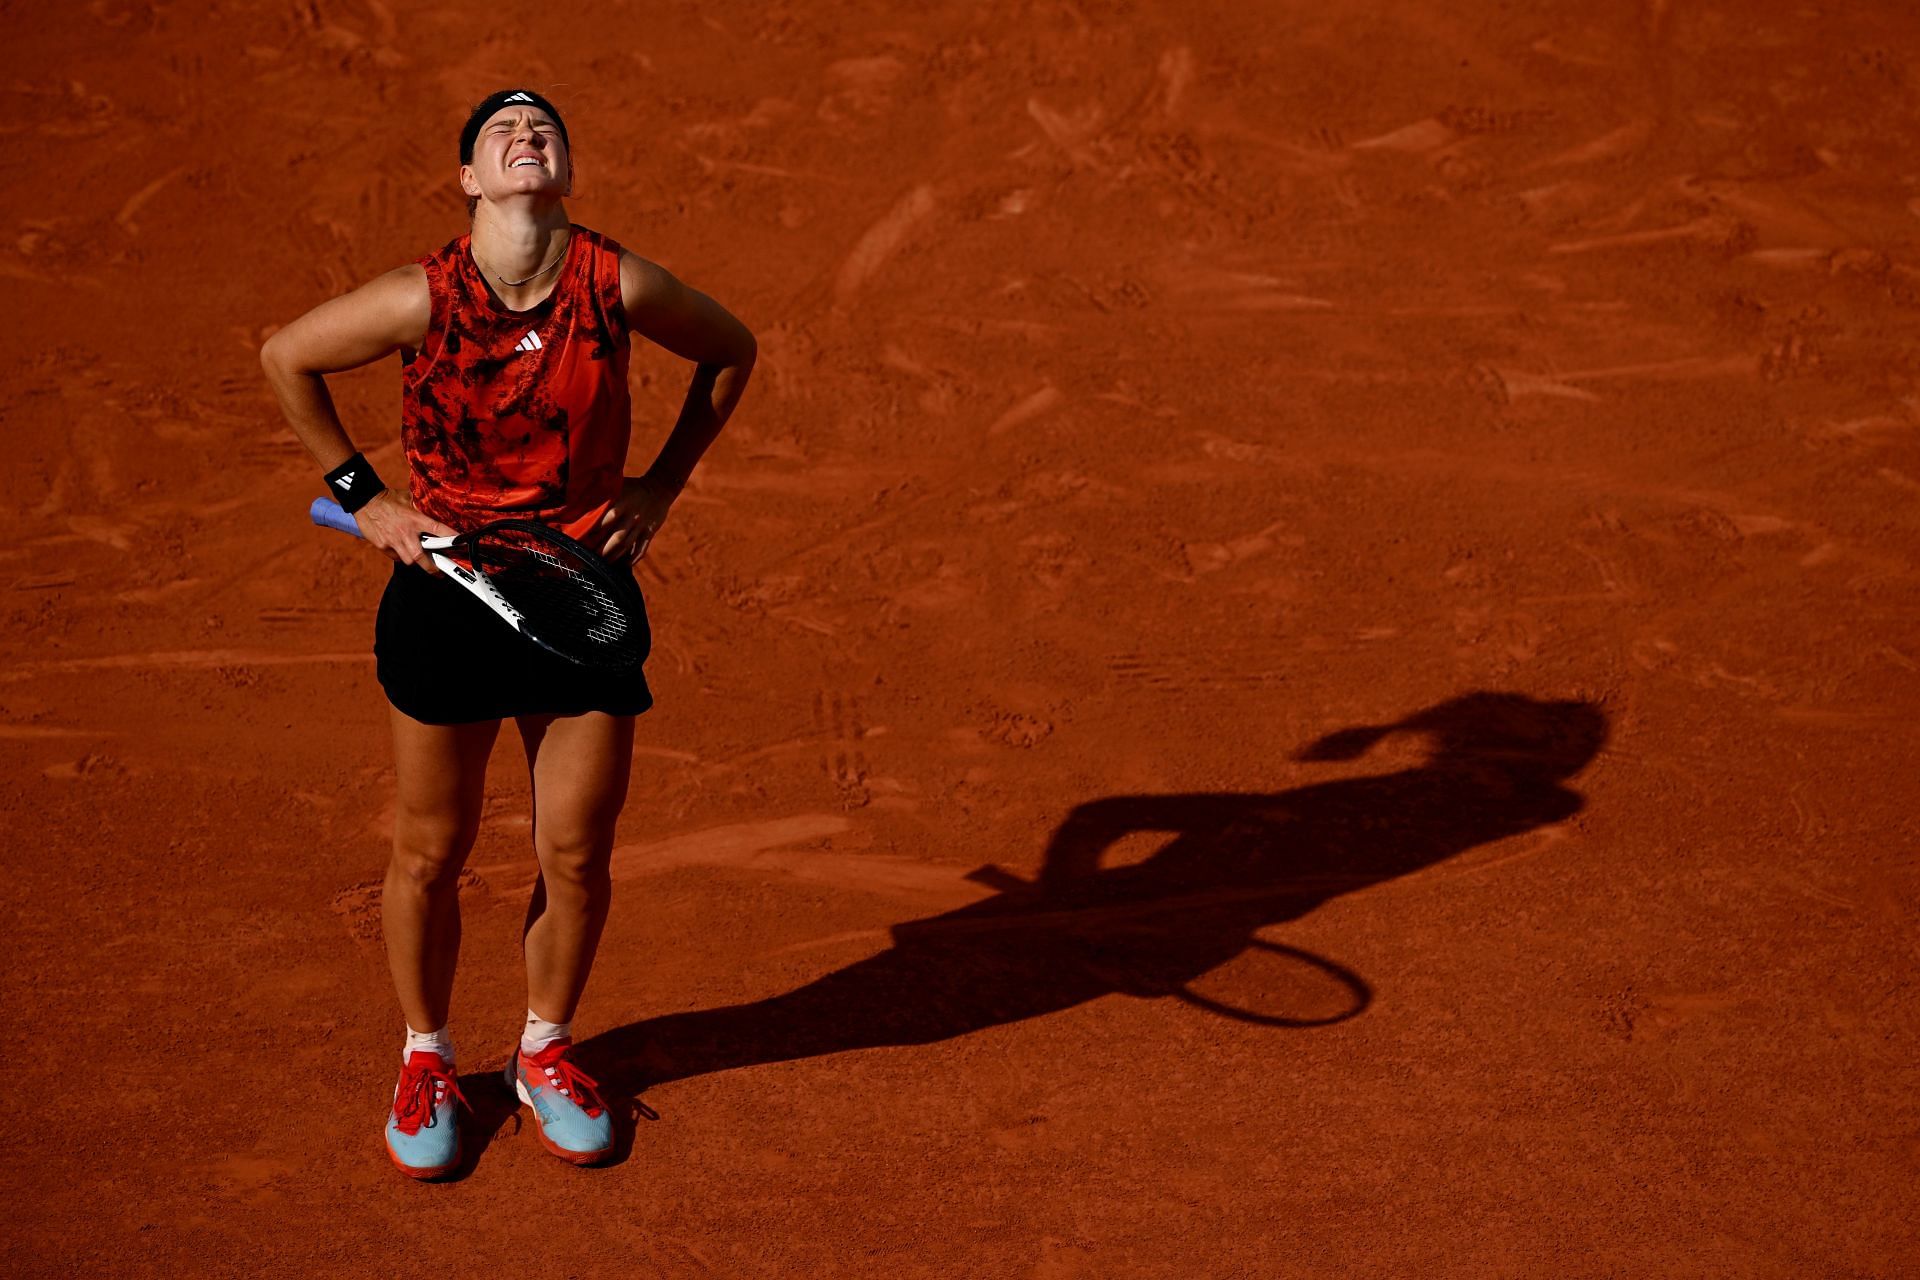 A dejected Muchova reflected on just how close she had come to a maiden Grand Slam win